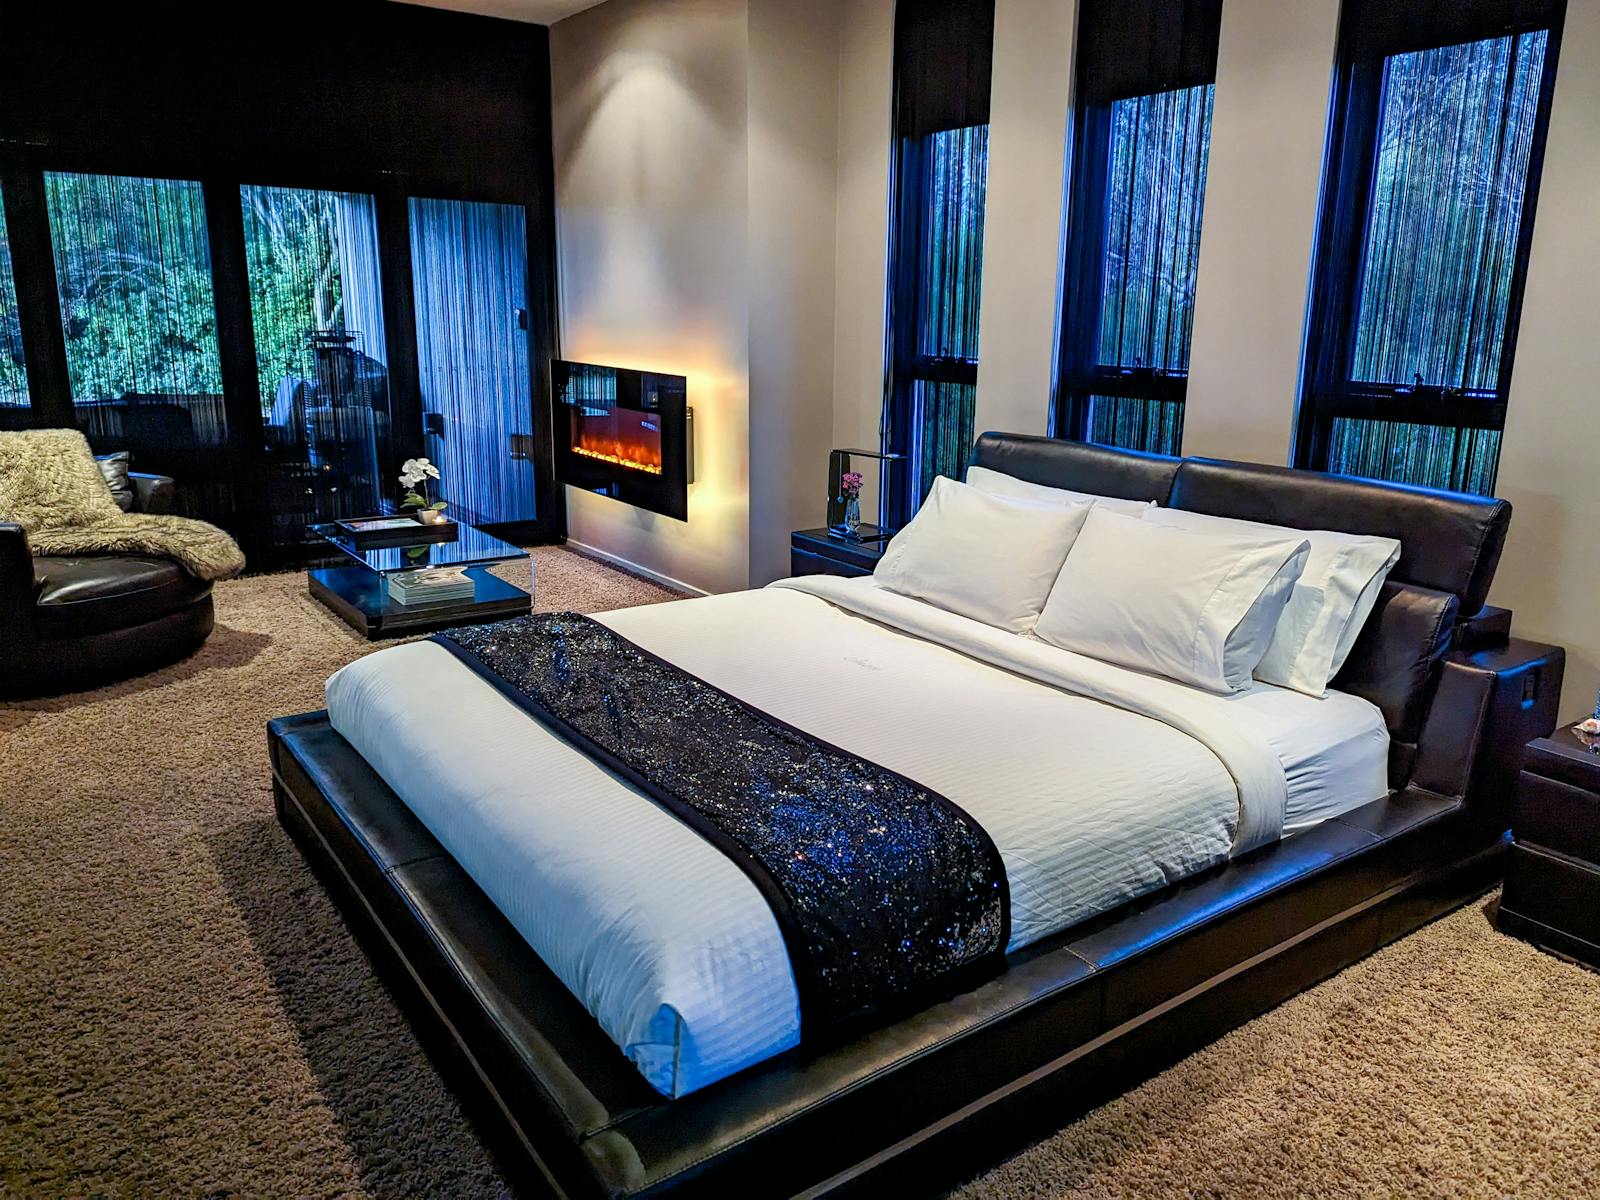 A room with a kingsize bed, fire place and comfortable chair